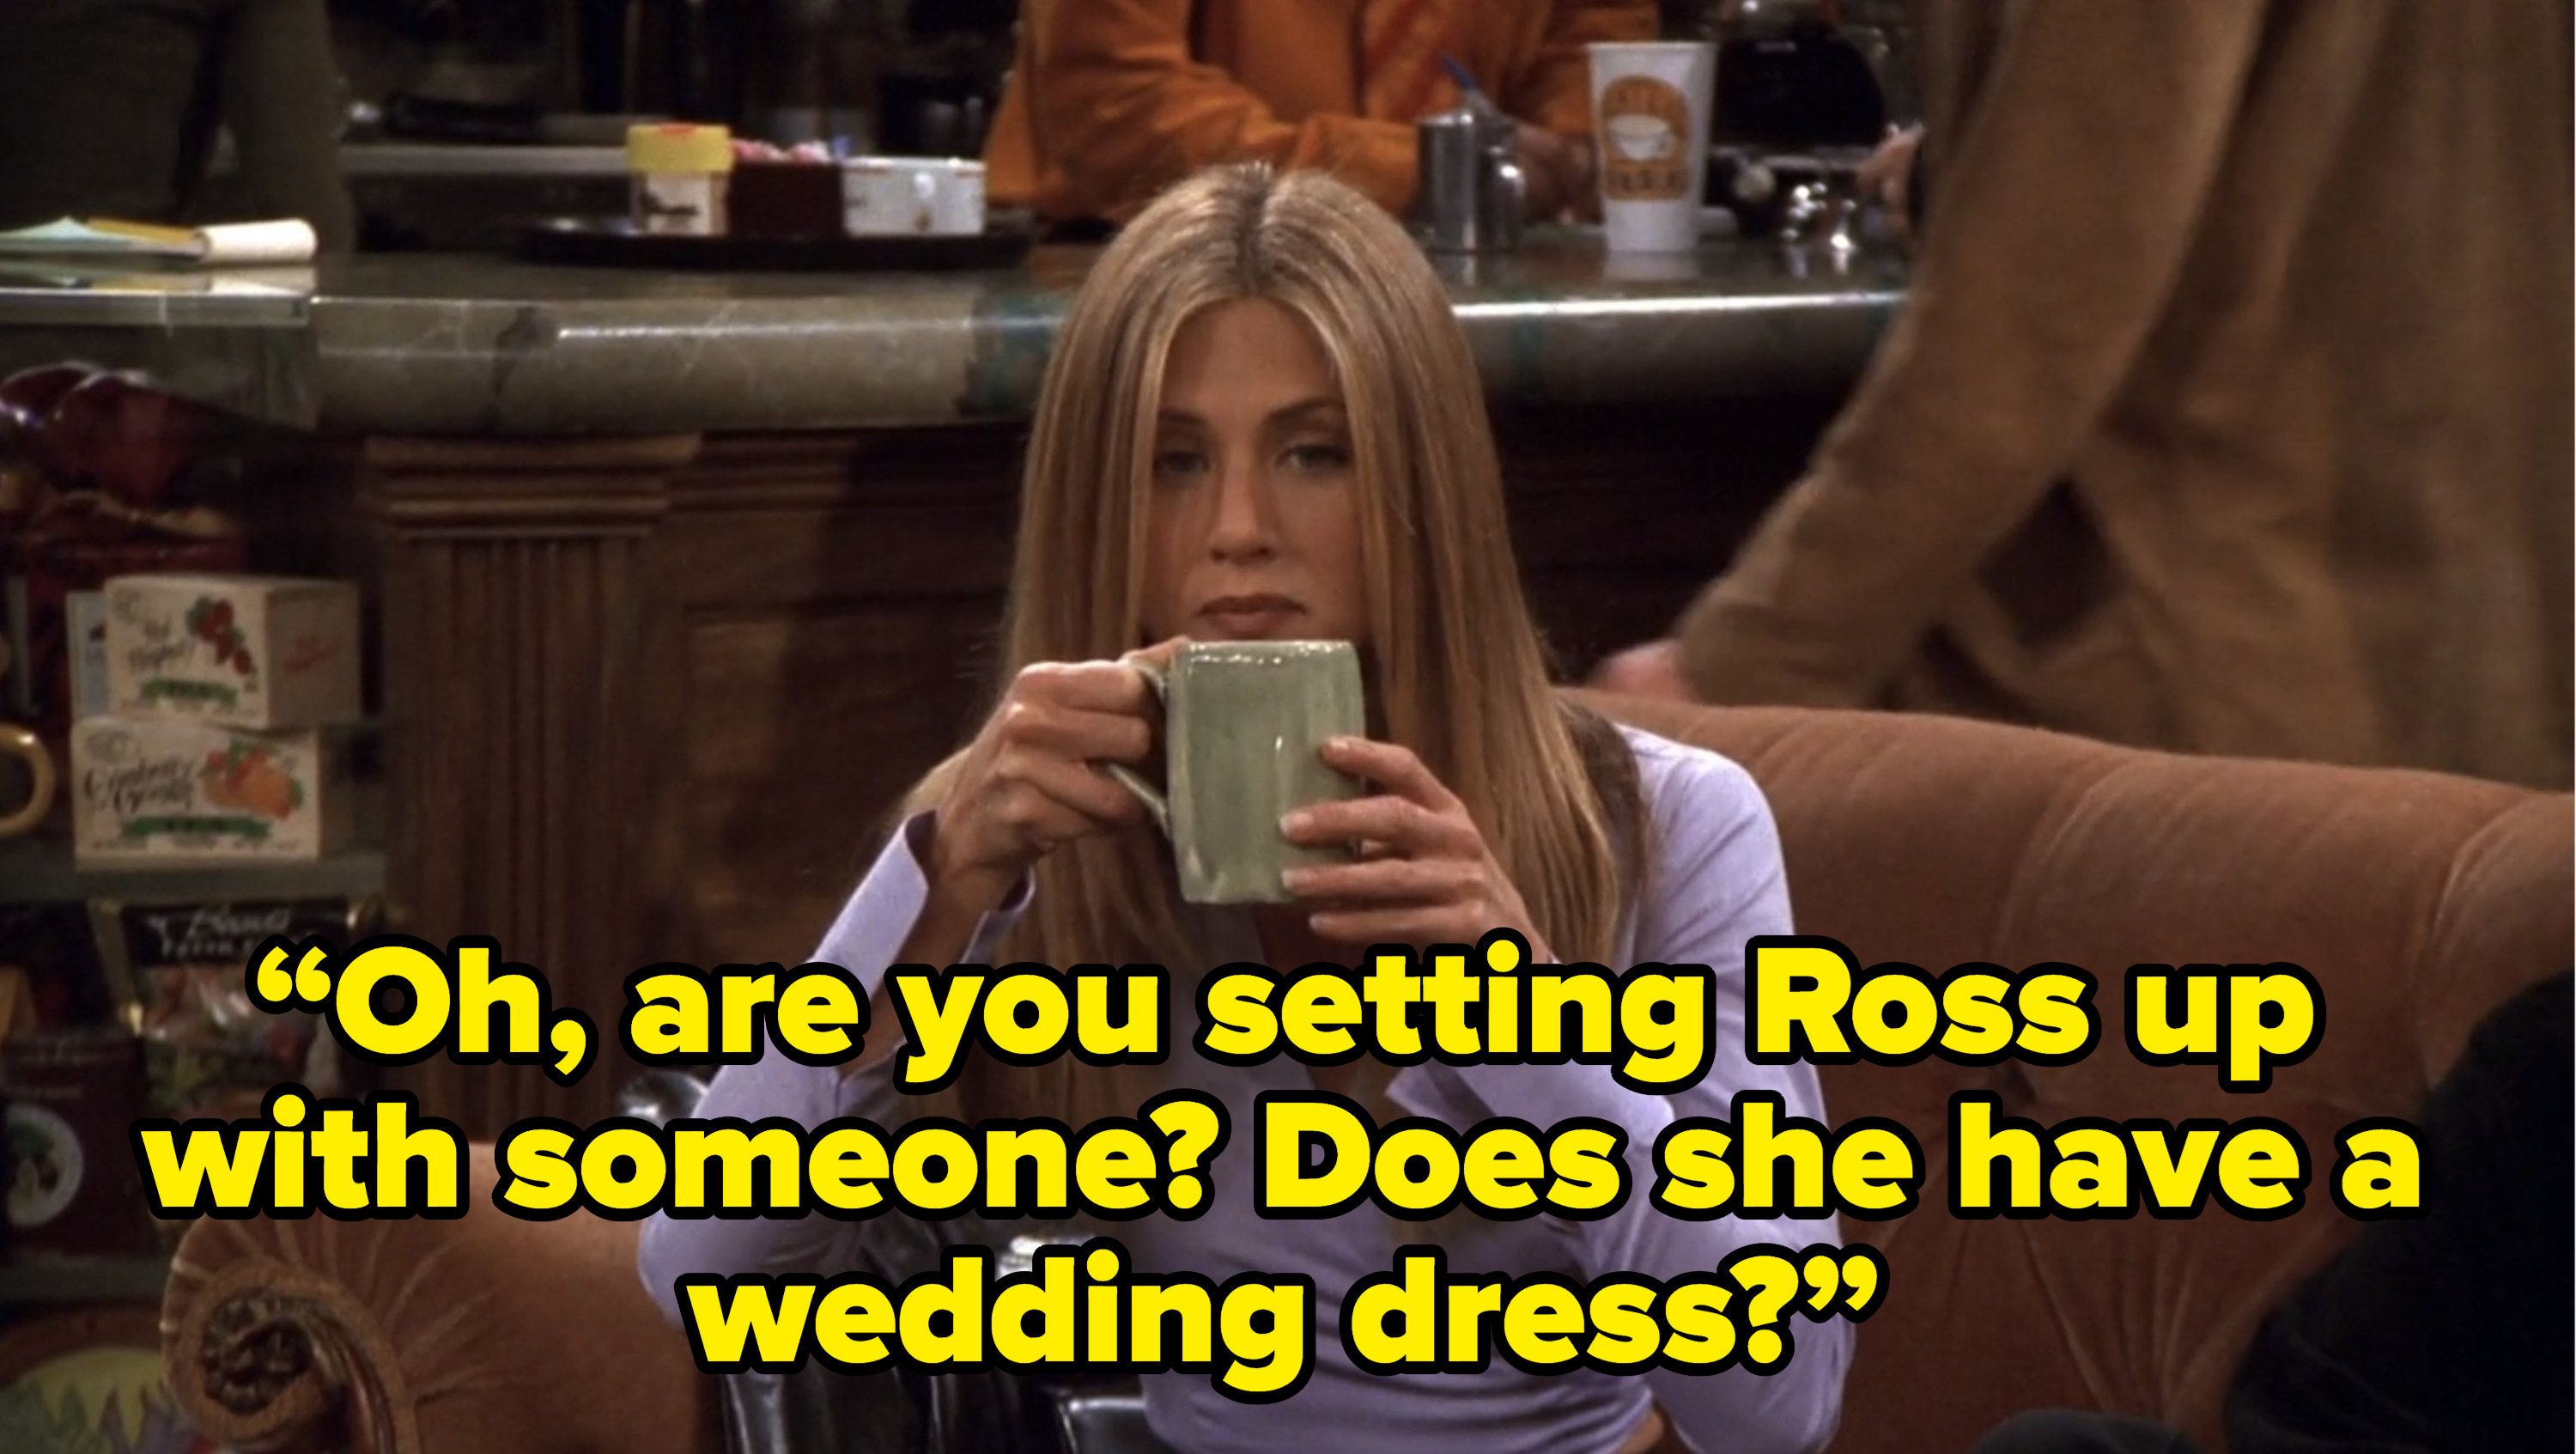 rachel asking monica “Oh, are you setting Ross up with someone? Does she have a wedding dress?” on friends